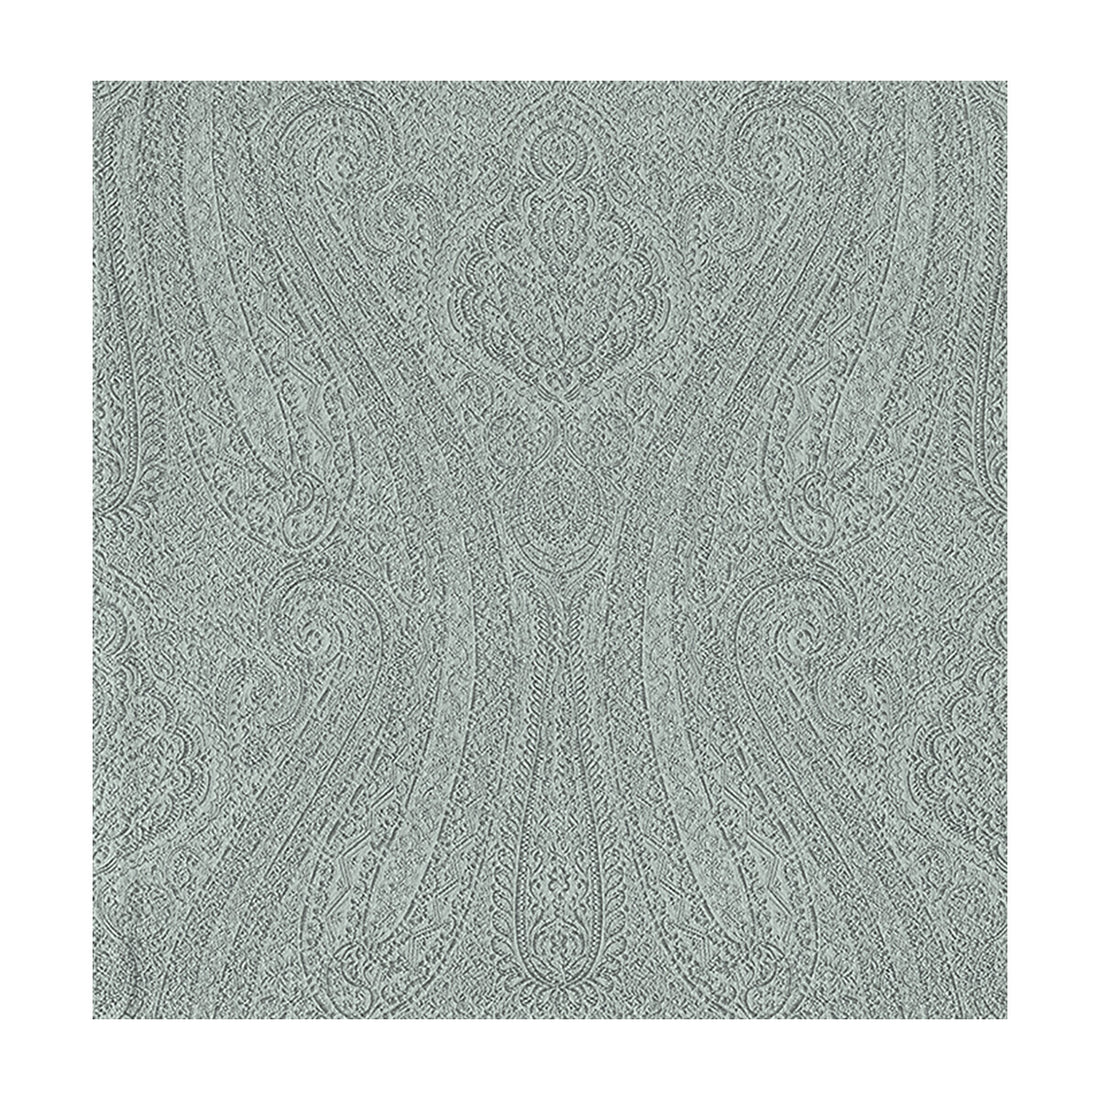 Livia fabric in spa color - pattern 34127.15.0 - by Kravet Design in the Candice Olson collection